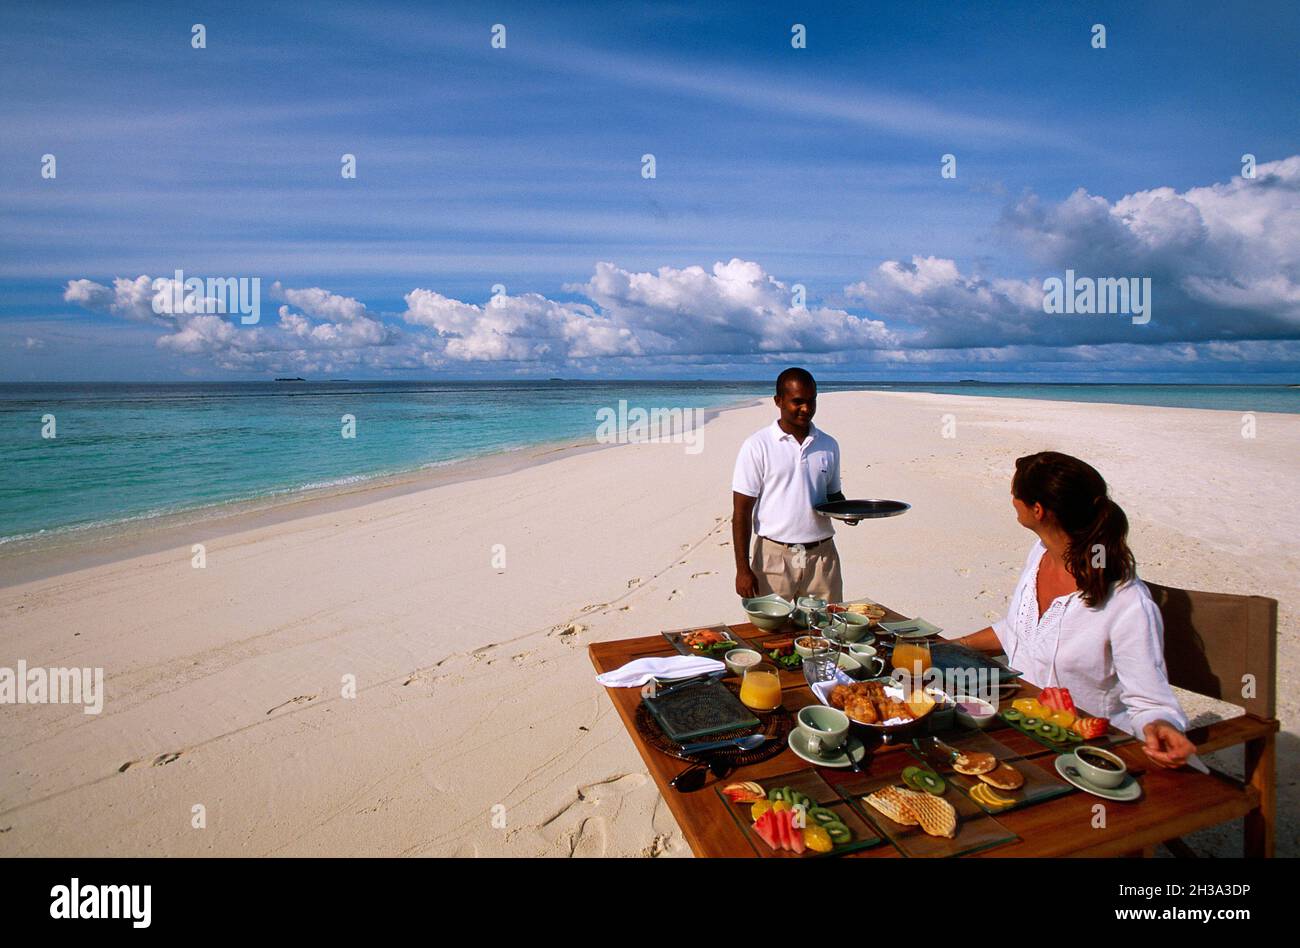 MALDIVES ARCHIPELAGO. ARI ATOLL. ARRIVAL ON THE ISLAND OF MADIVARU: PRIVATE ISLAND WITH LUXURY ACCOMMODATION IN TENT AND PRIVATE POOL (MANAGED BY BANY Stock Photo